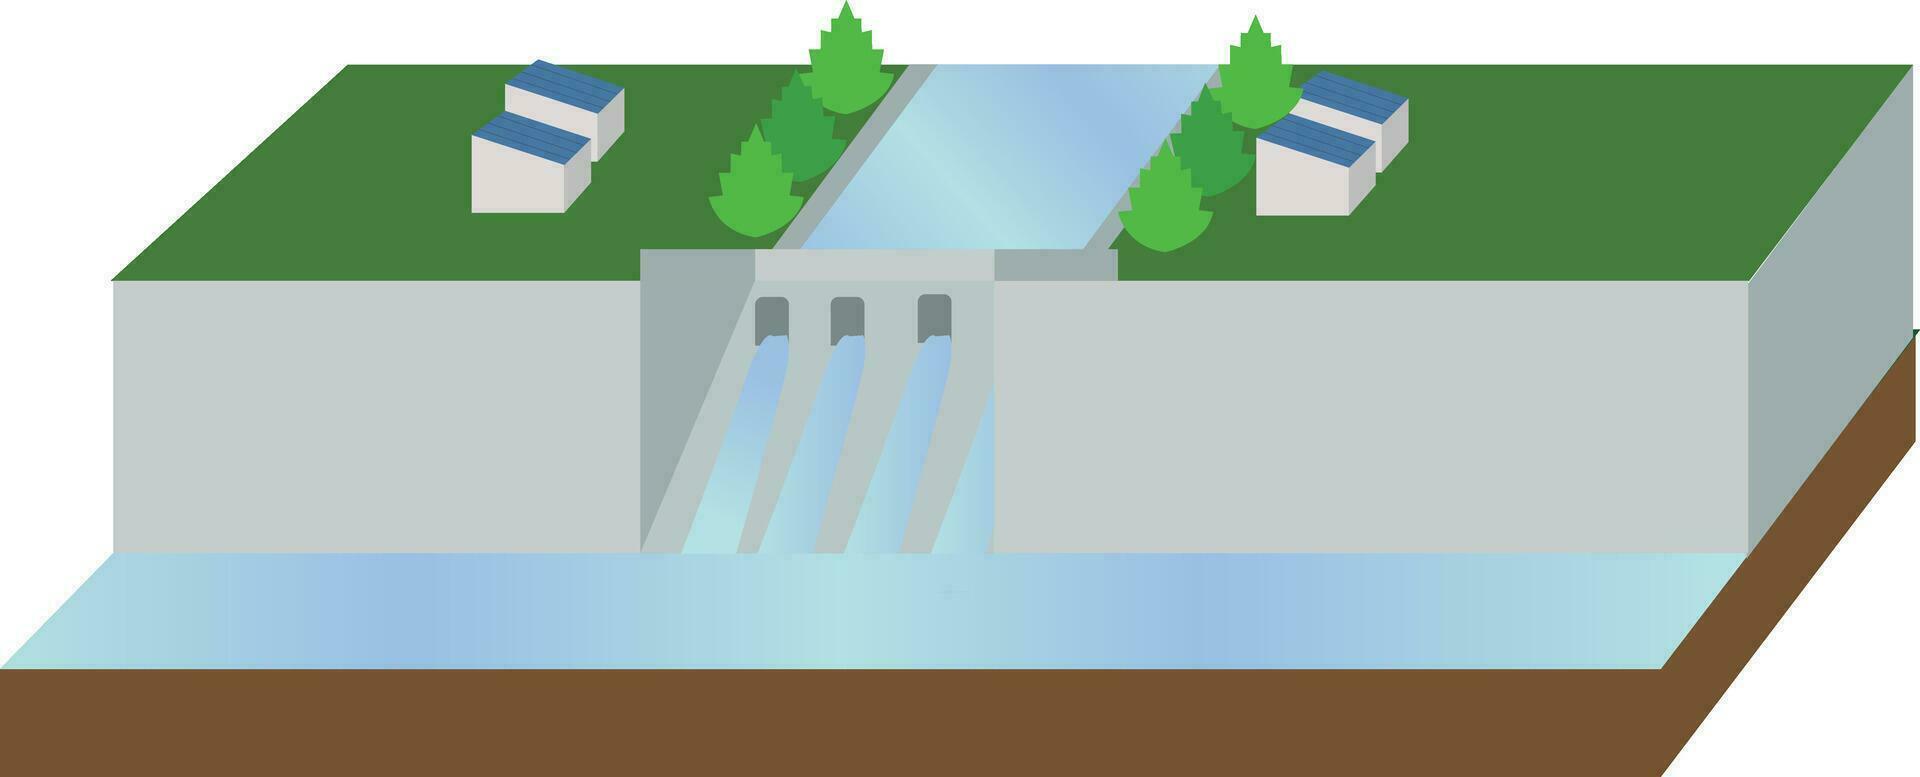 isometric Hydroelectric Energy Plant vector illustration, renewable energy of the waterfall movement, industrial infrastructure in isometric design